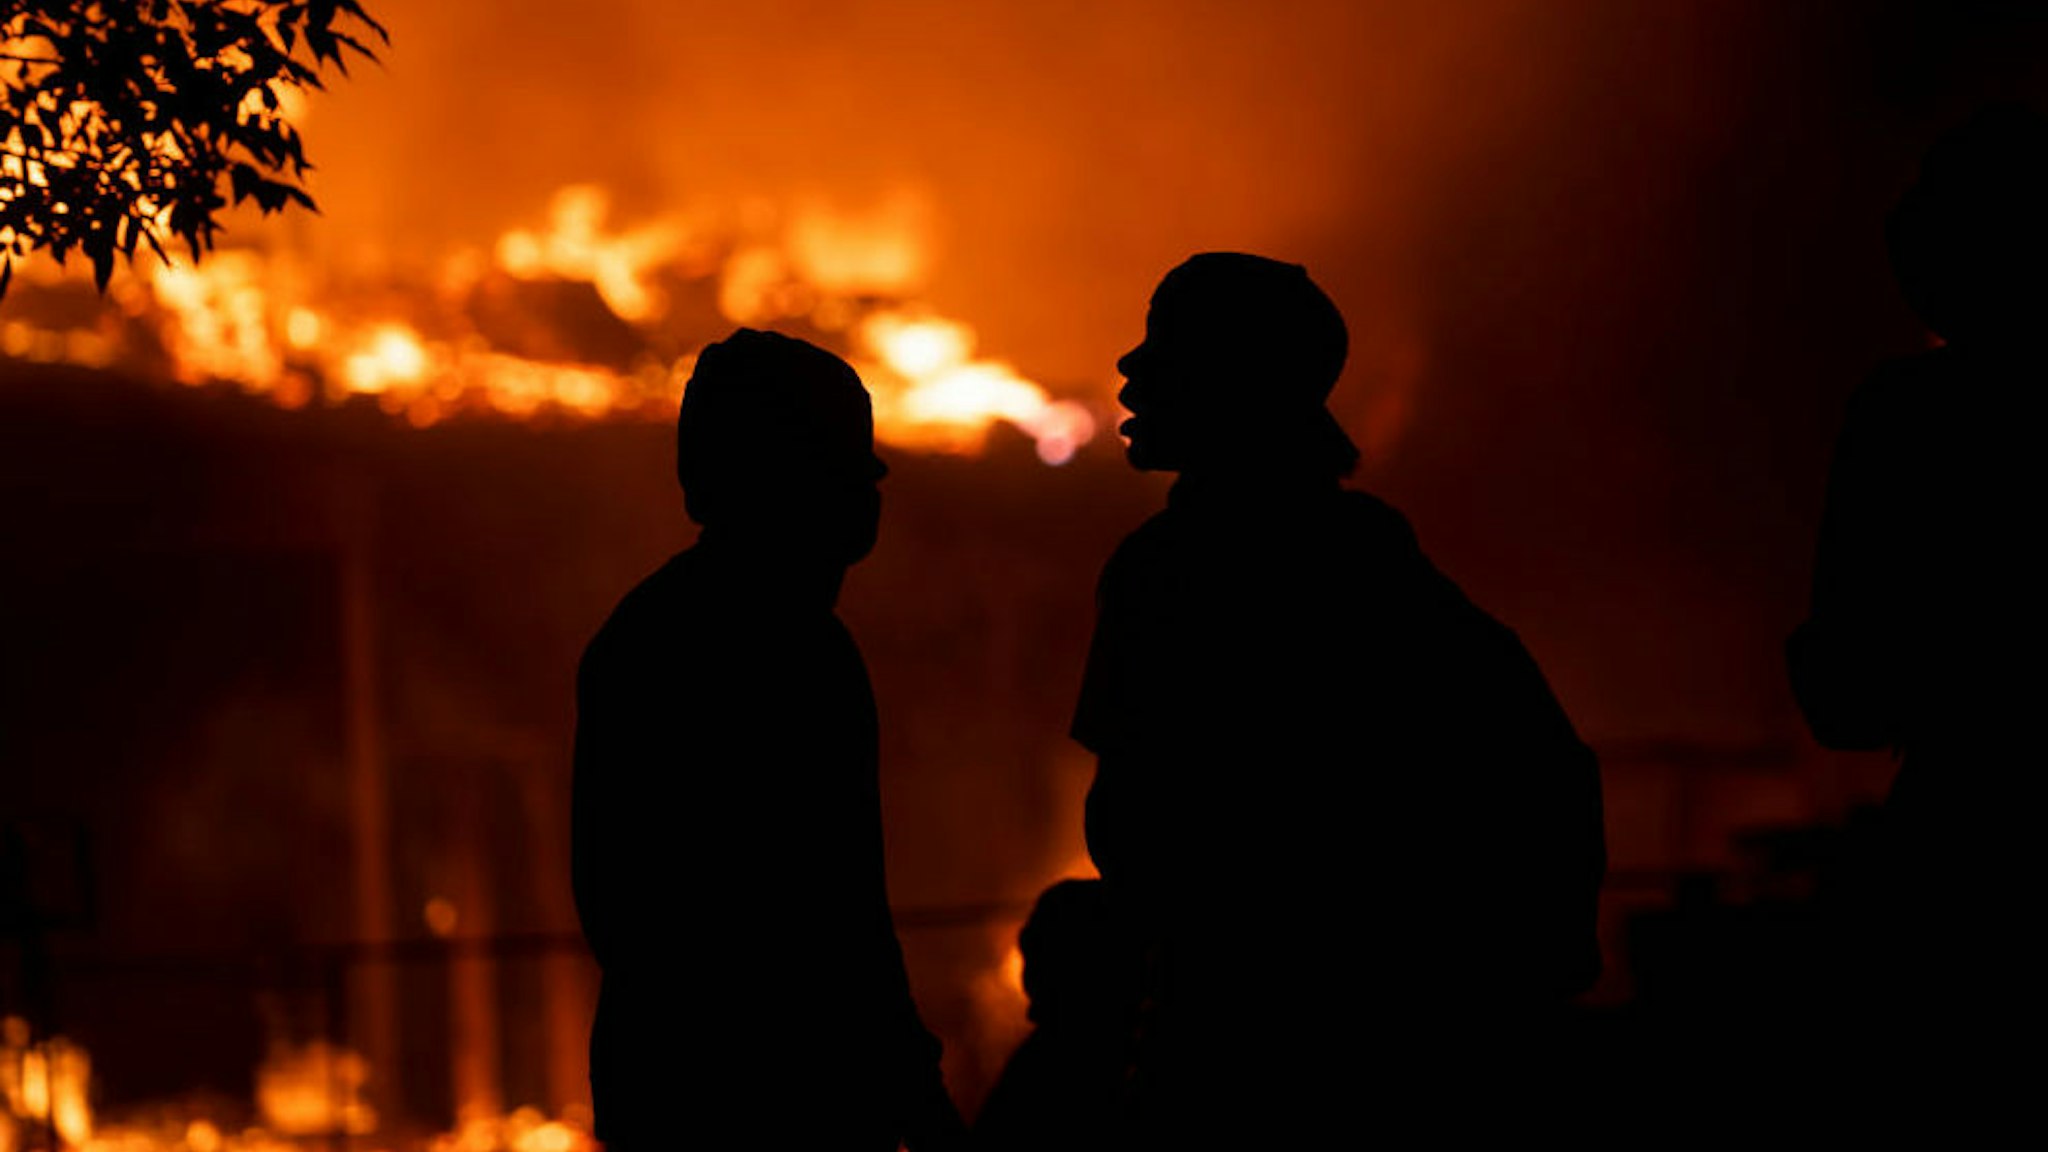 A construction site burns in a large fire near the Third Police Precinct on May 27, 2020 in Minneapolis, Minnesota.